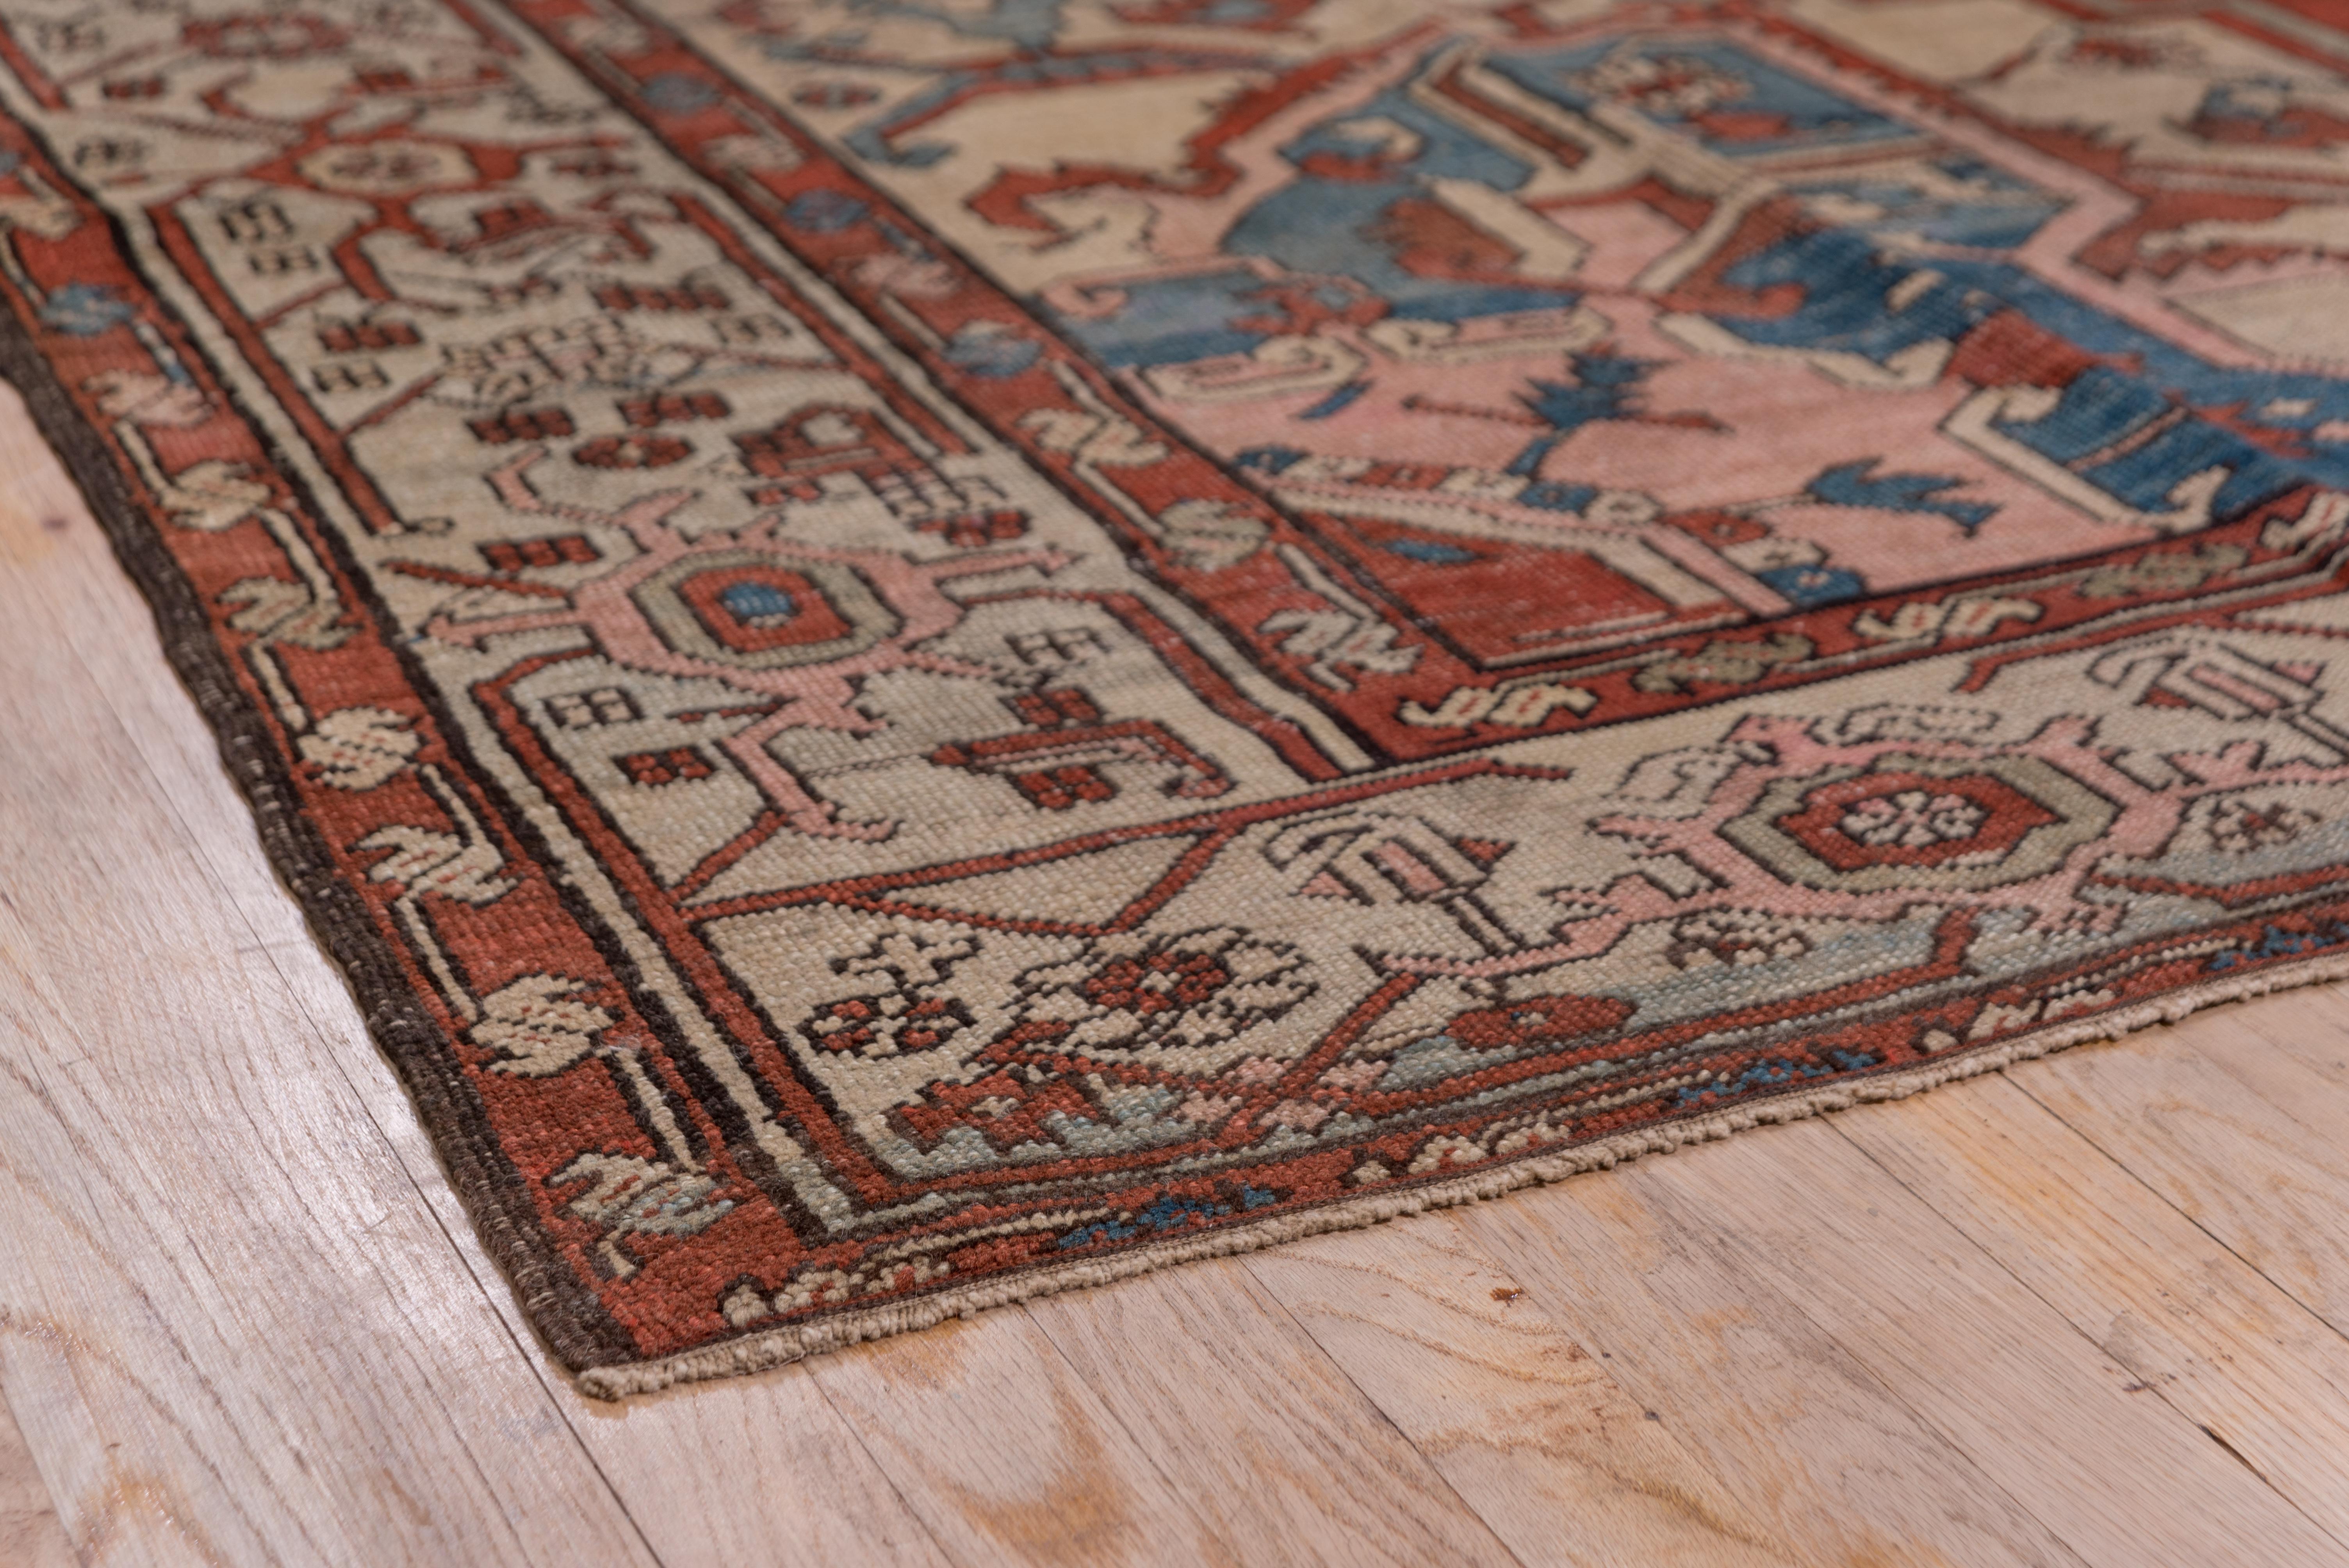 Early 20th Century Fine Antique Persian Serapi Rug with Great Colors